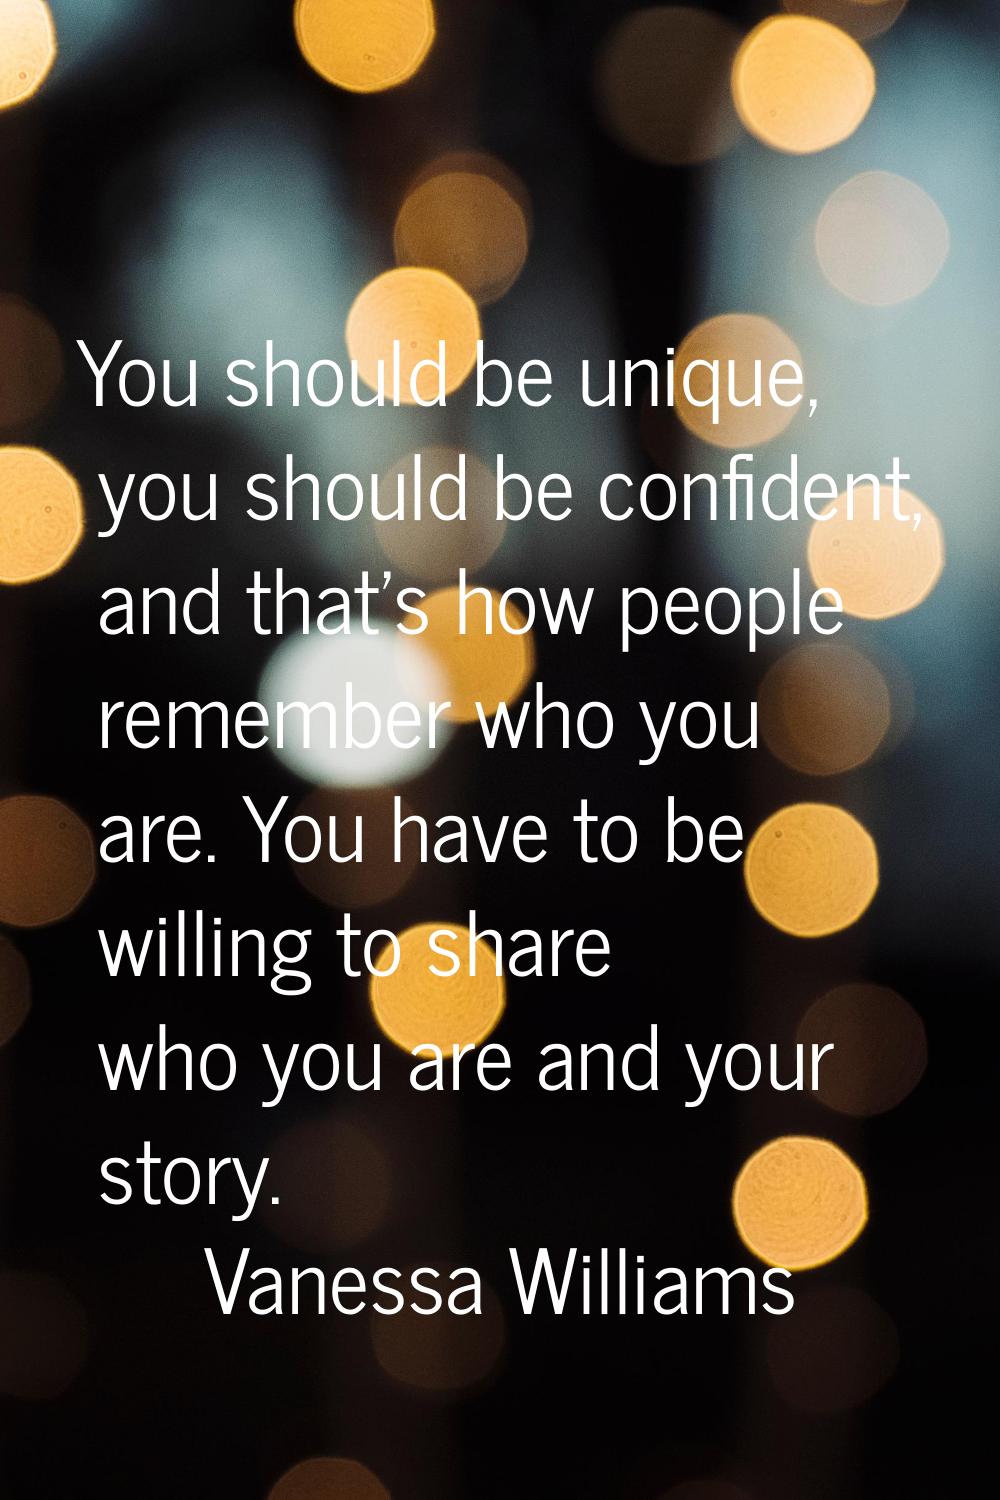 You should be unique, you should be confident, and that's how people remember who you are. You have